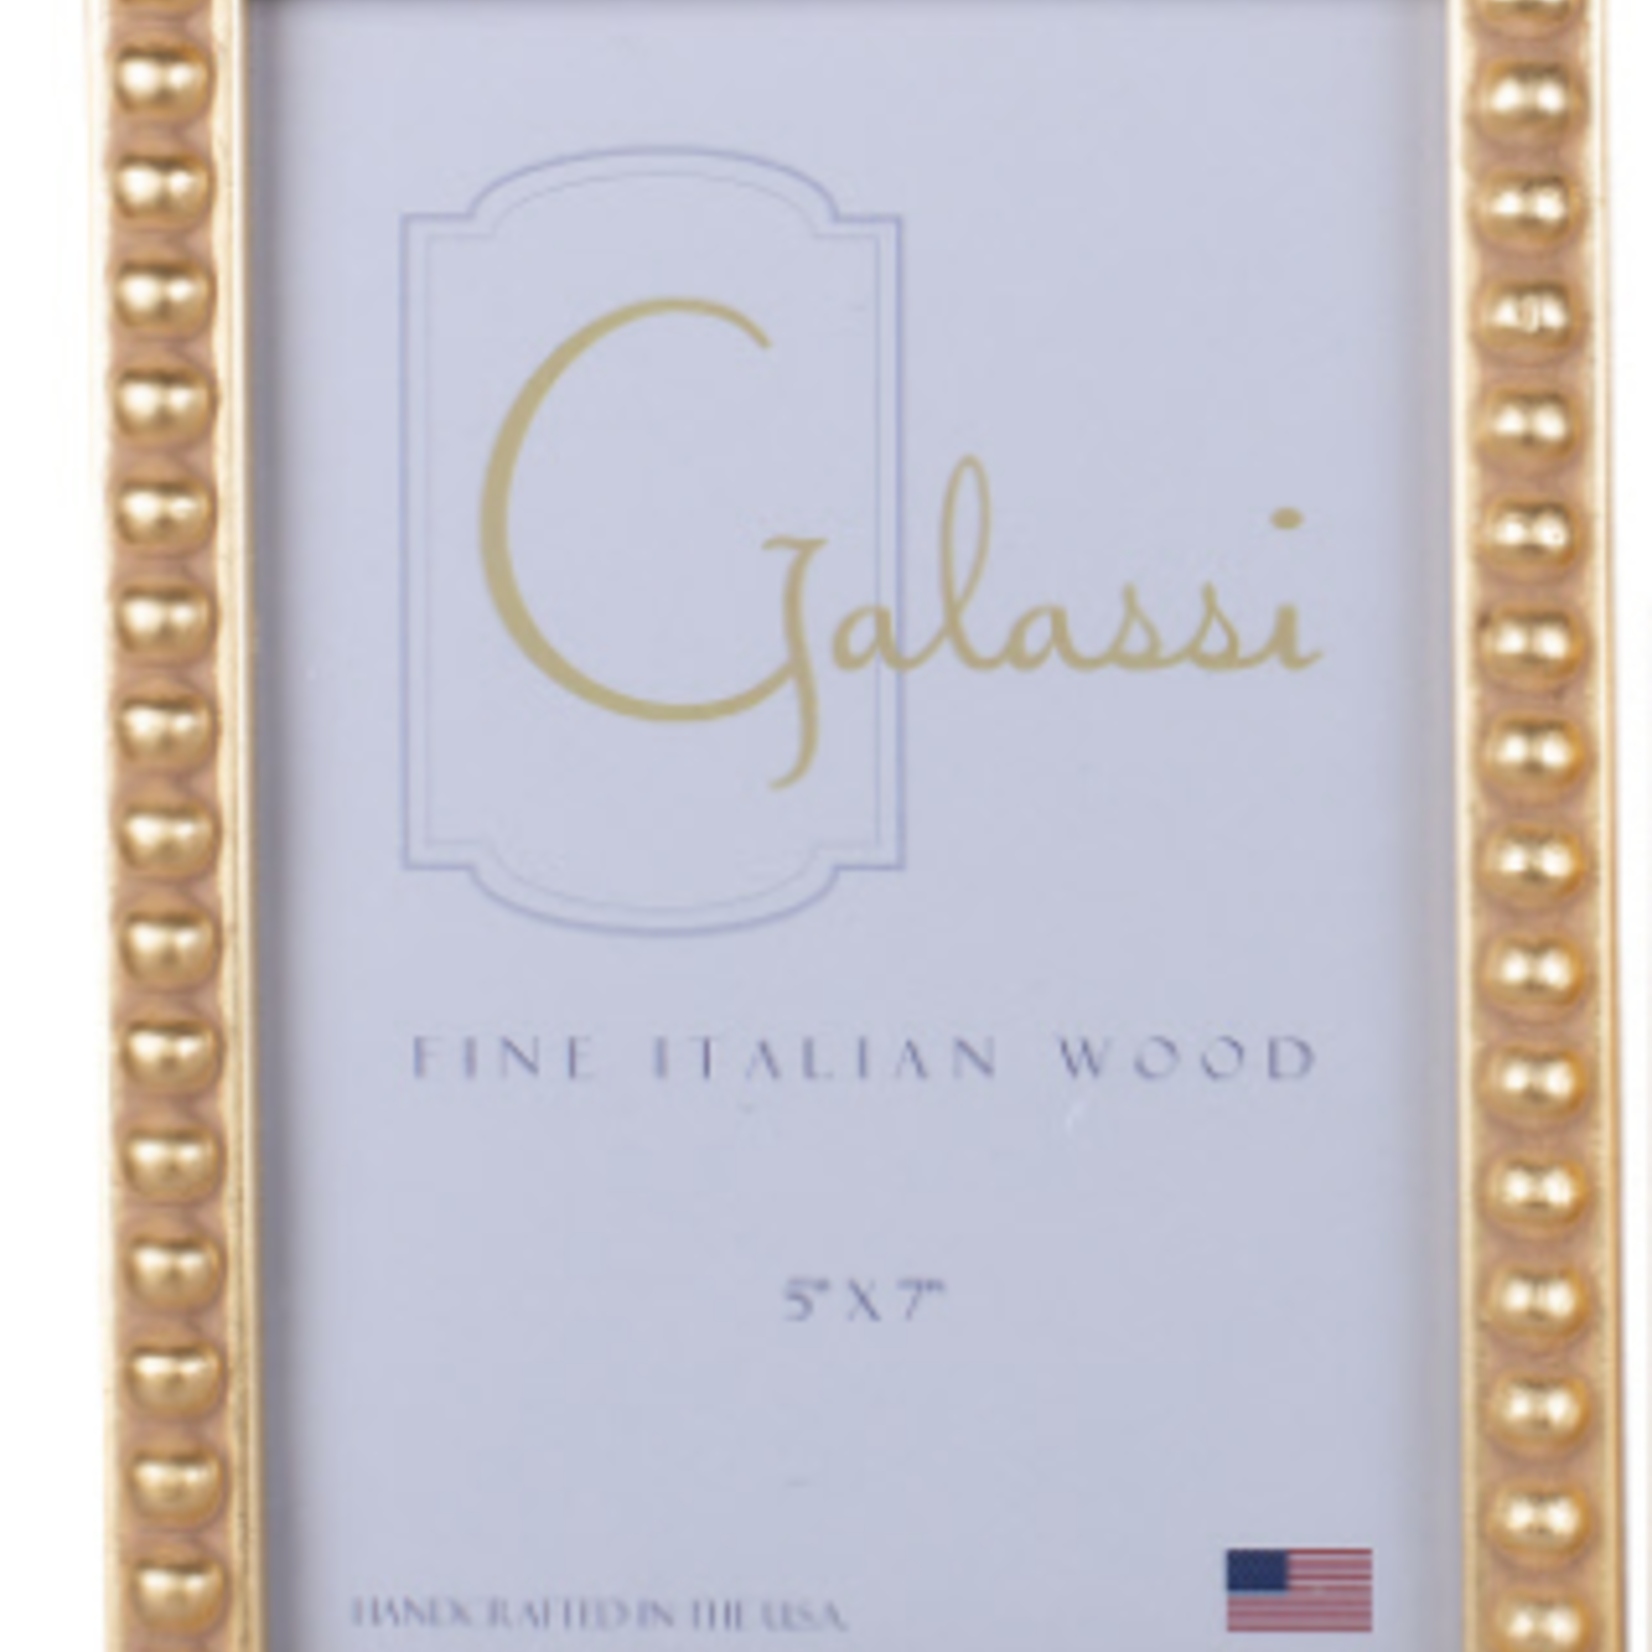 Galassi Diana Gold 4 x 6 Picture Frame